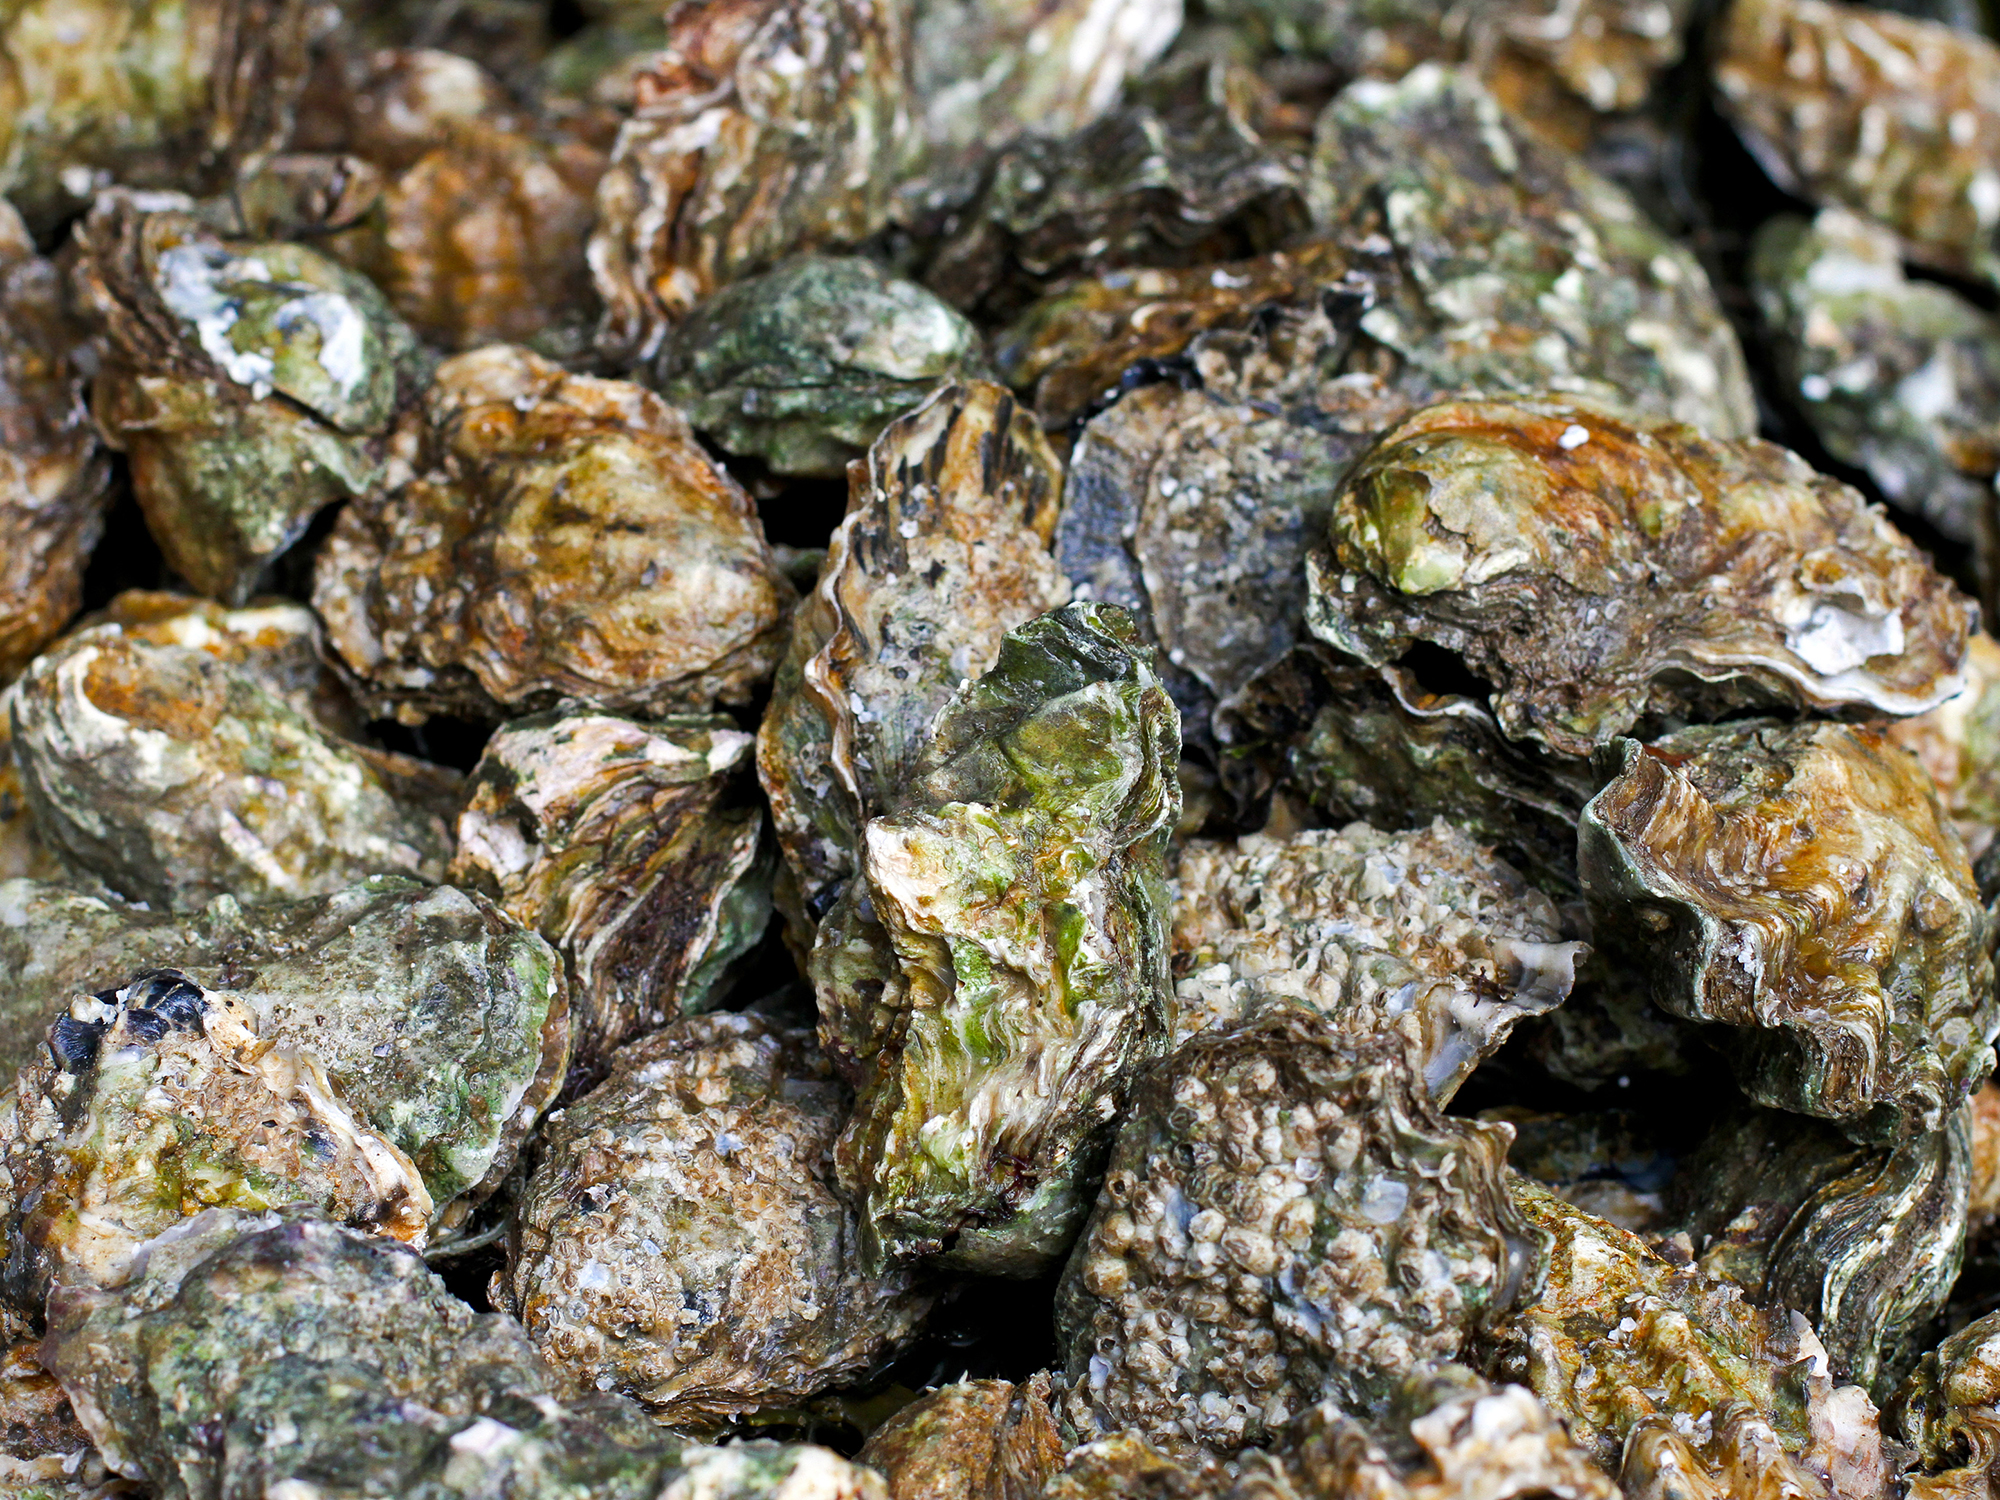 South Carolina is recycling empty shells to revive wild oyster beds